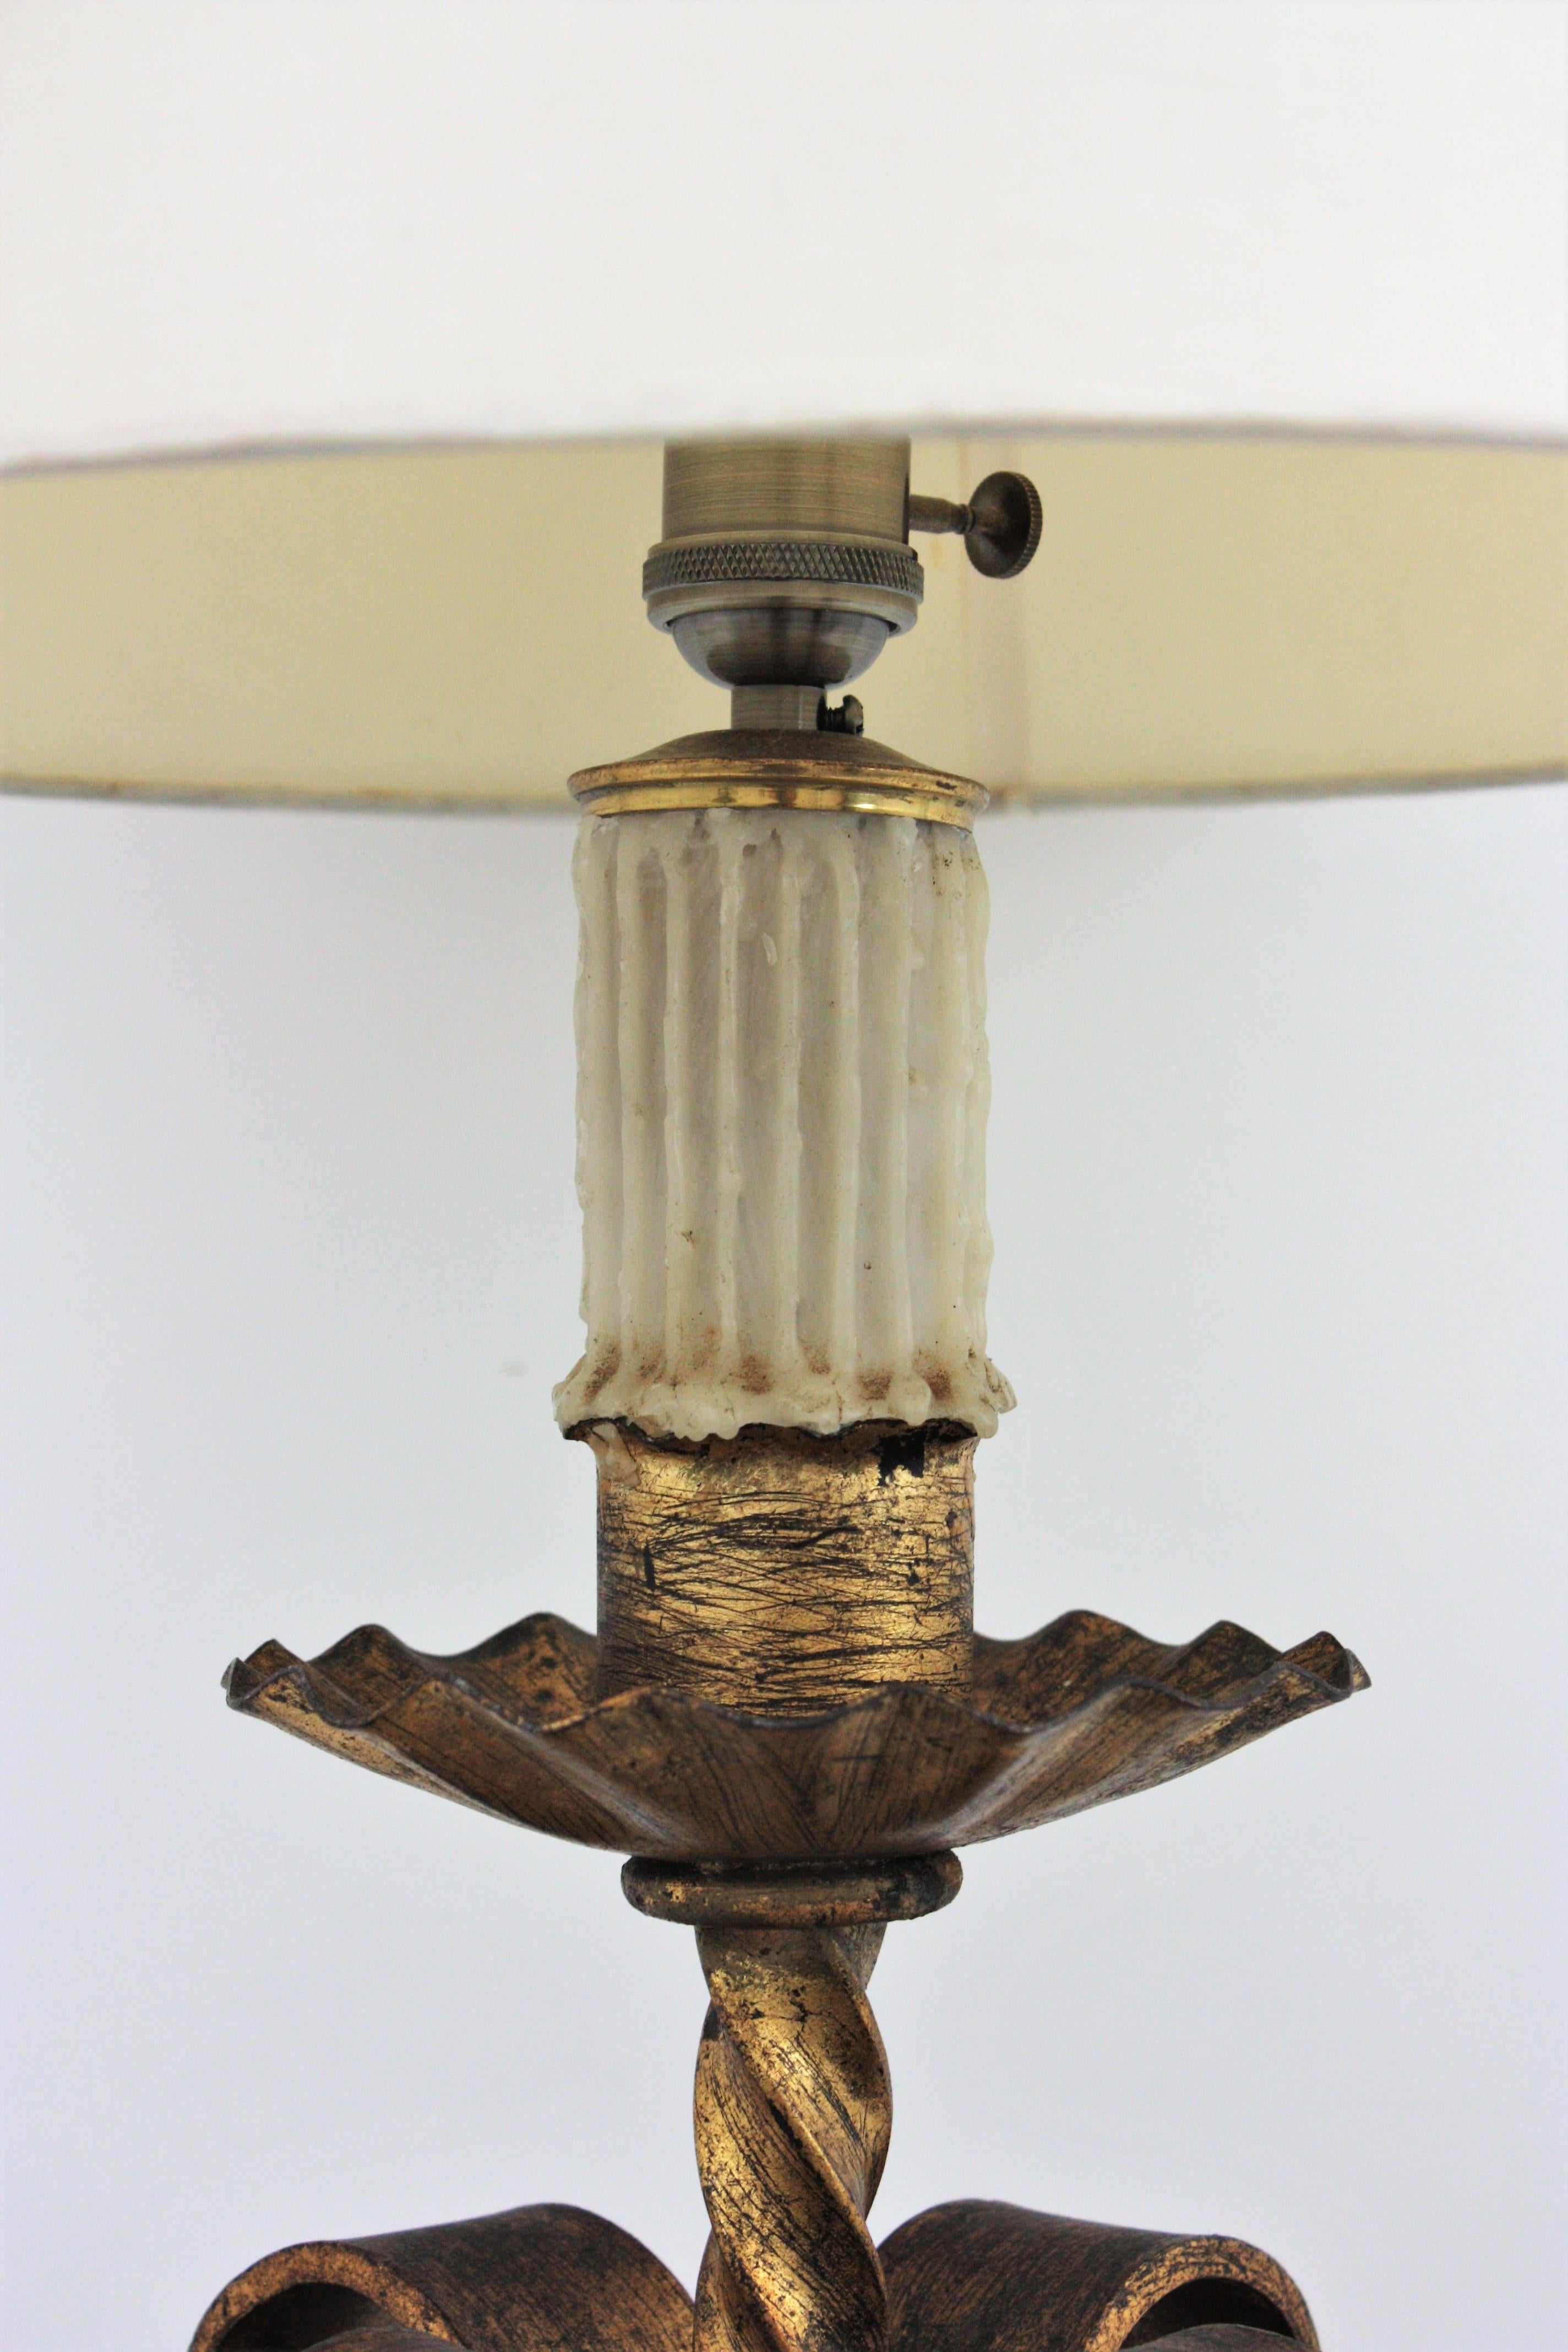 Spanish Revival Scrollwork Table Lamp in Gilt Wrought Iron, 1940s For Sale 2